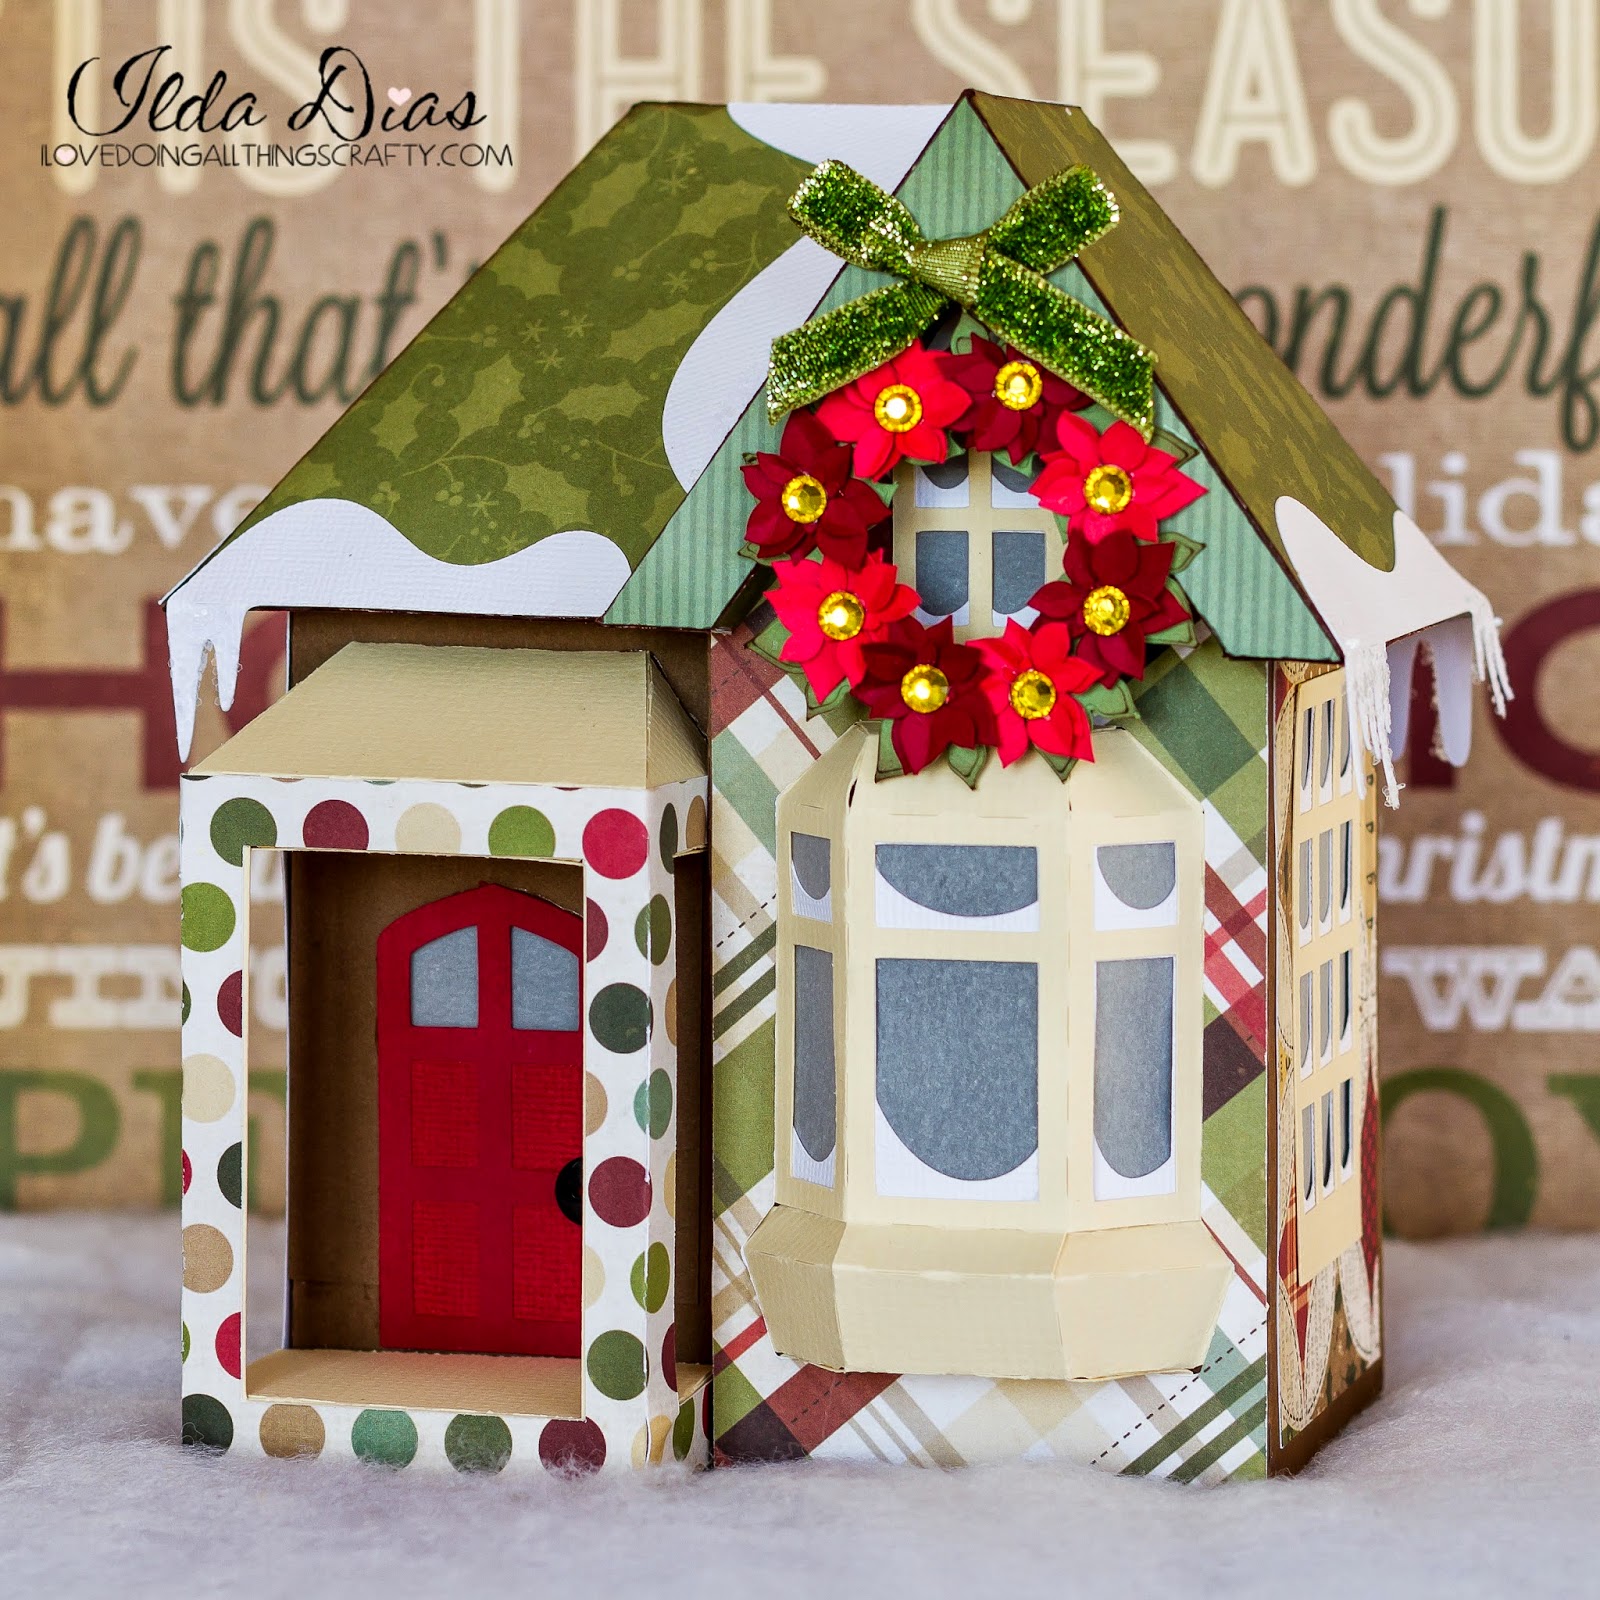 I Love Doing All Things Crafty: 3D Snowy House Box